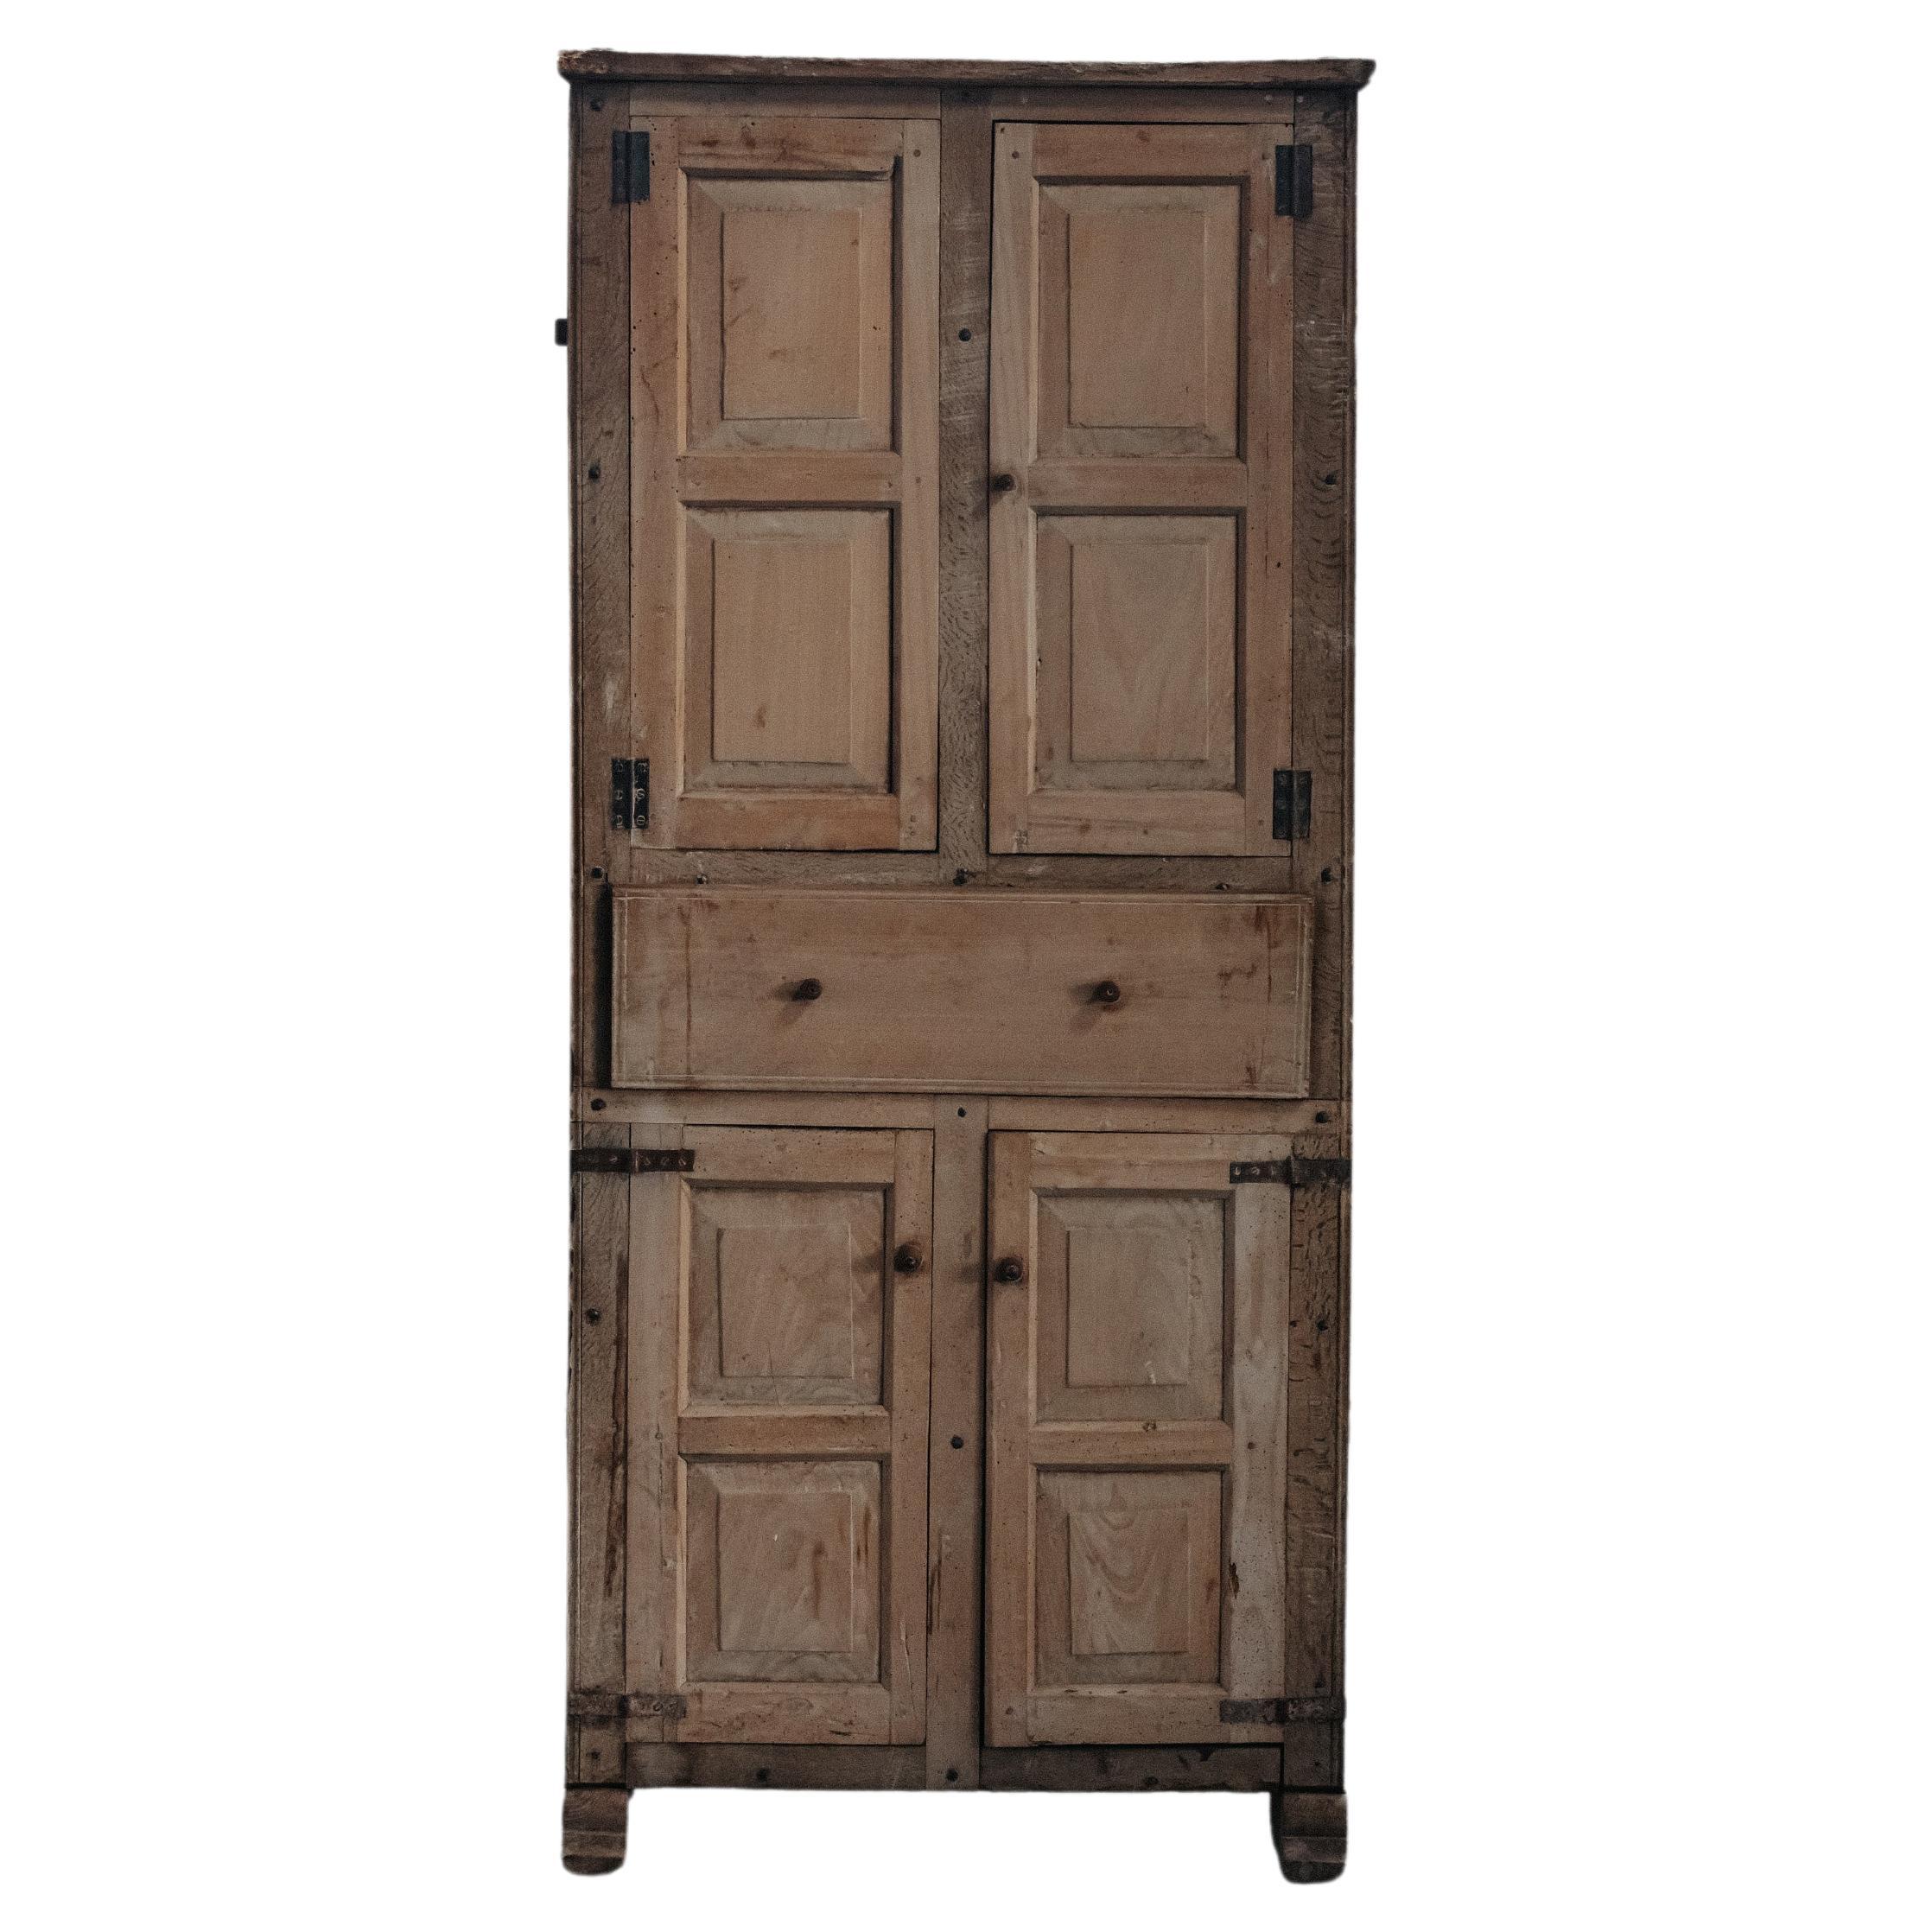 Early Art Populaire Cabinet From France, Circa 1880 For Sale